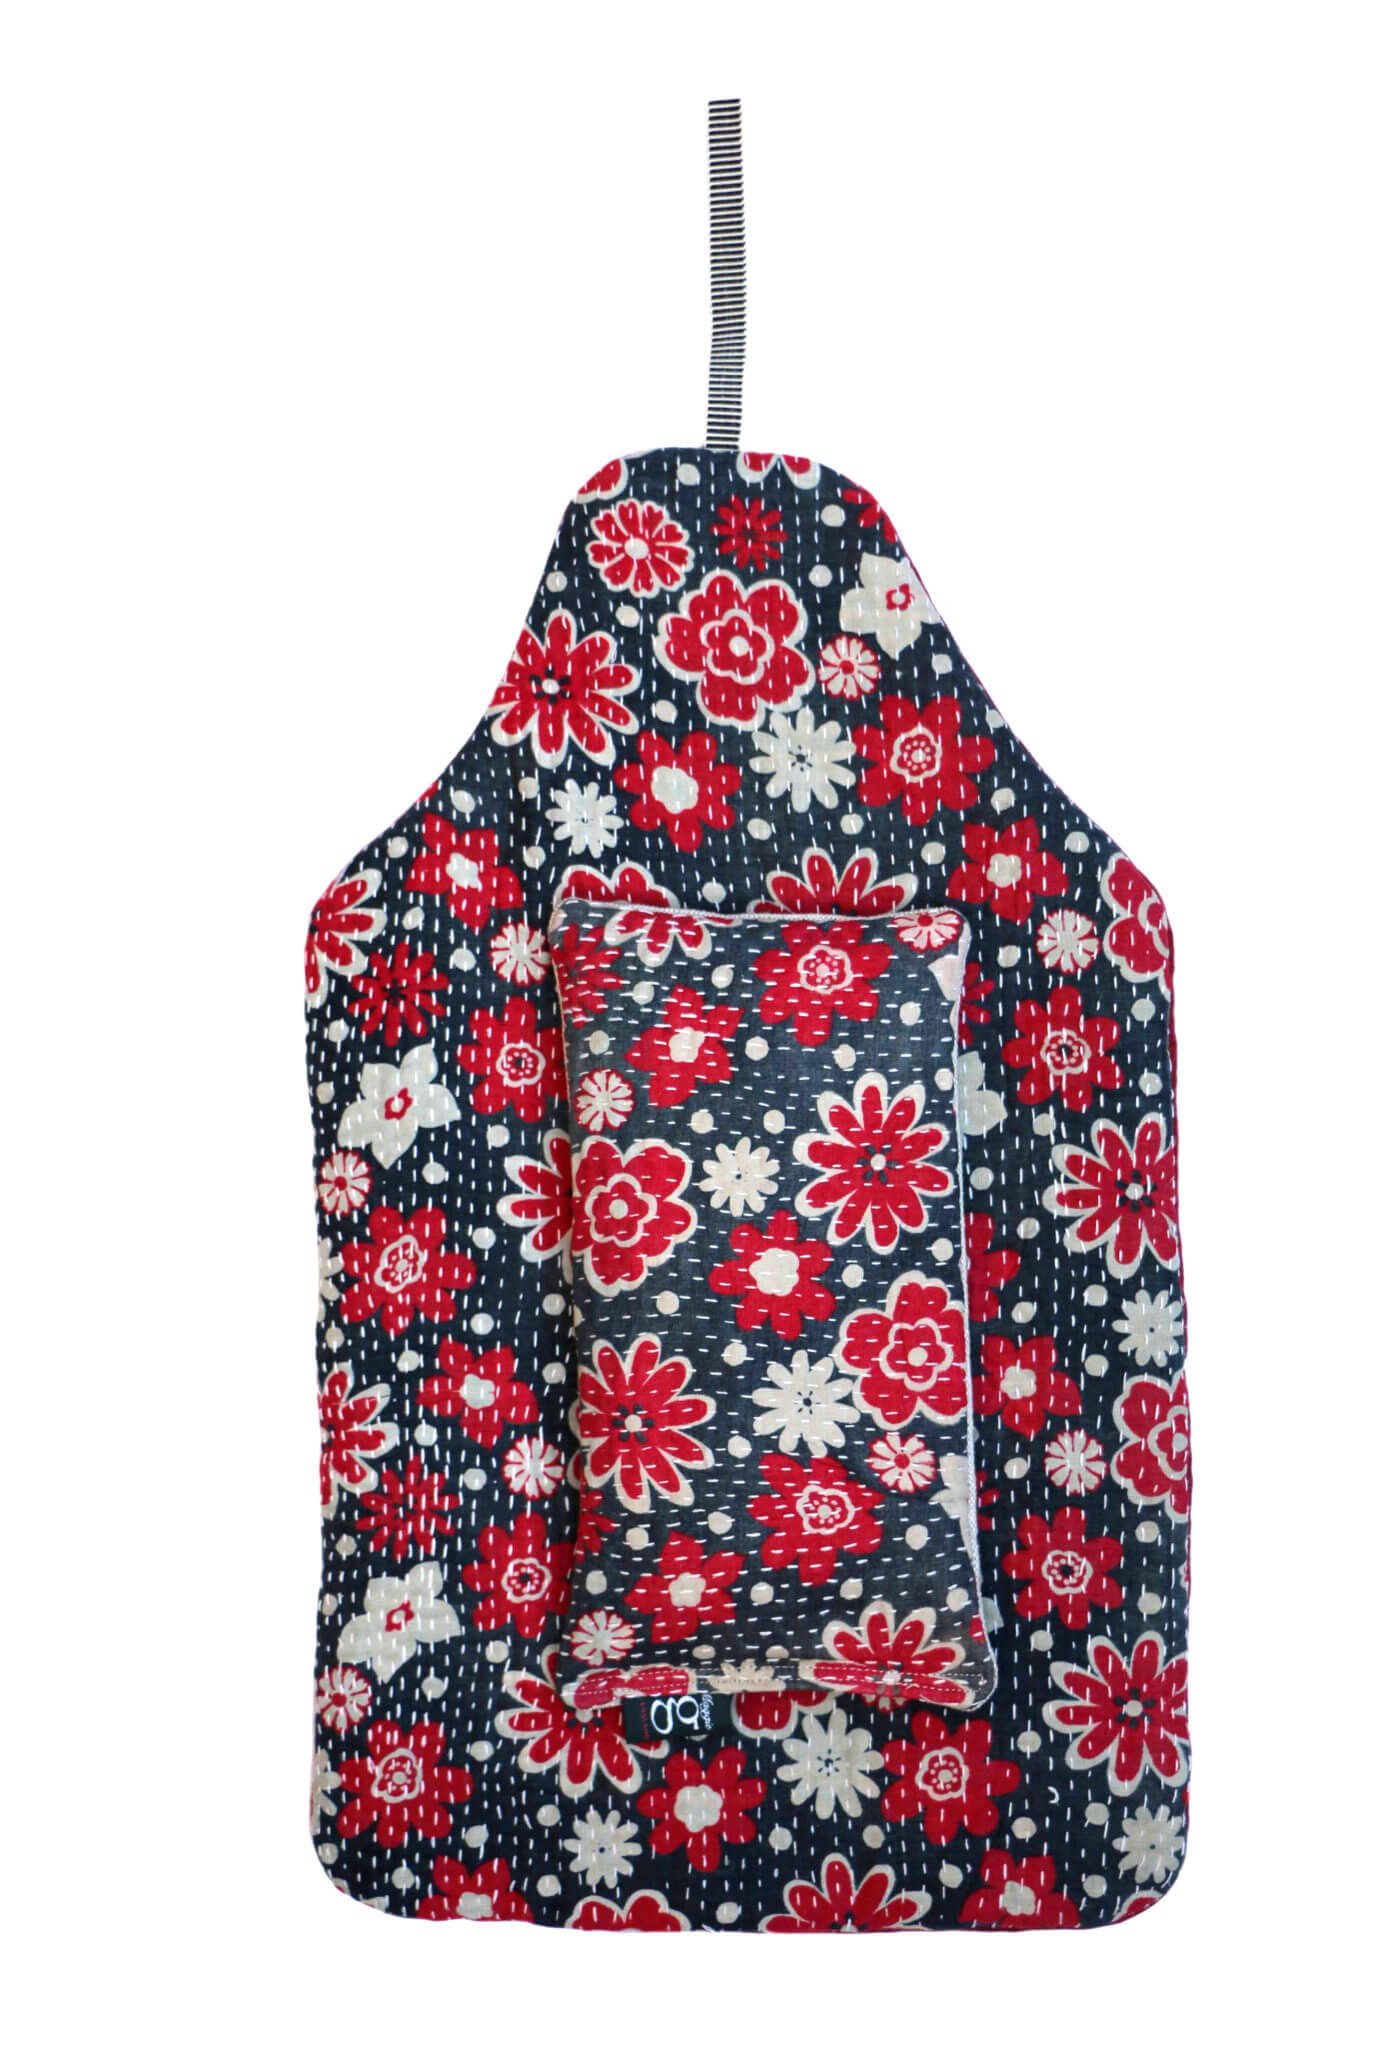 Beautiful soft quilted kantha hot water bottle covers - Daisy